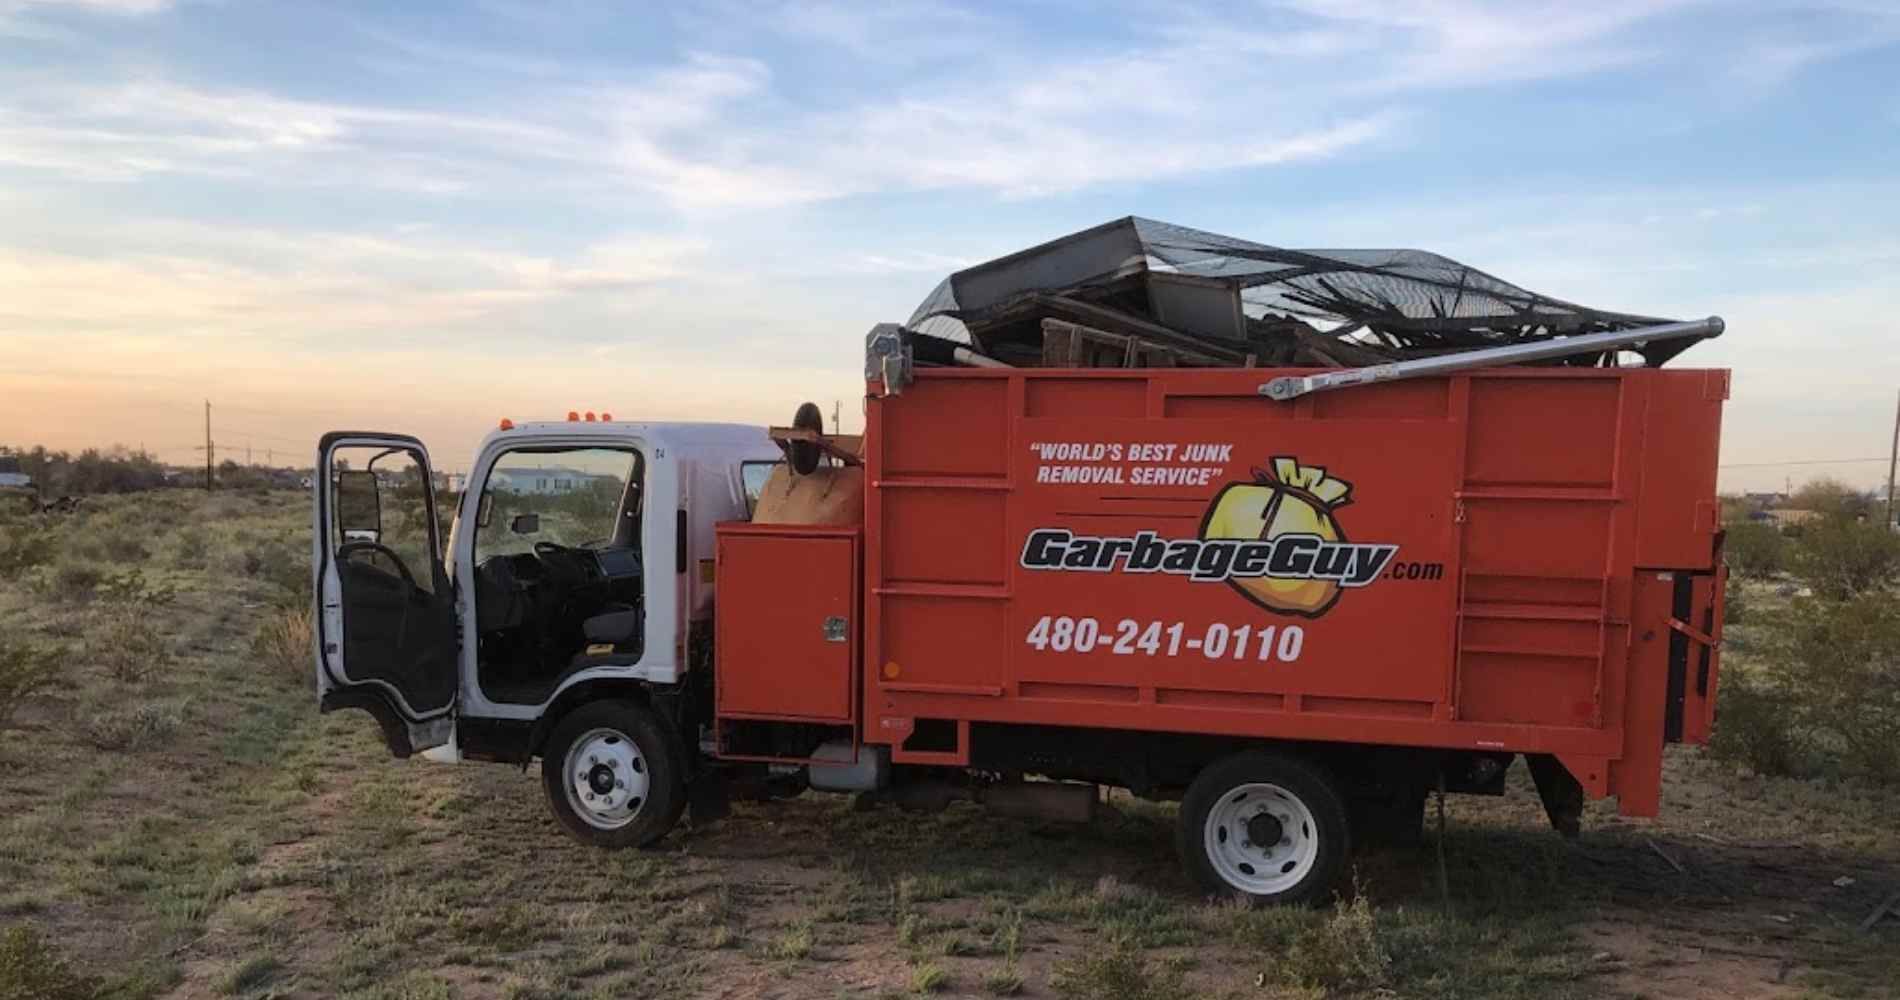 #1 for Junk Removal in San Tan Valley, AZ with Over 1200 5-Star Reviews!